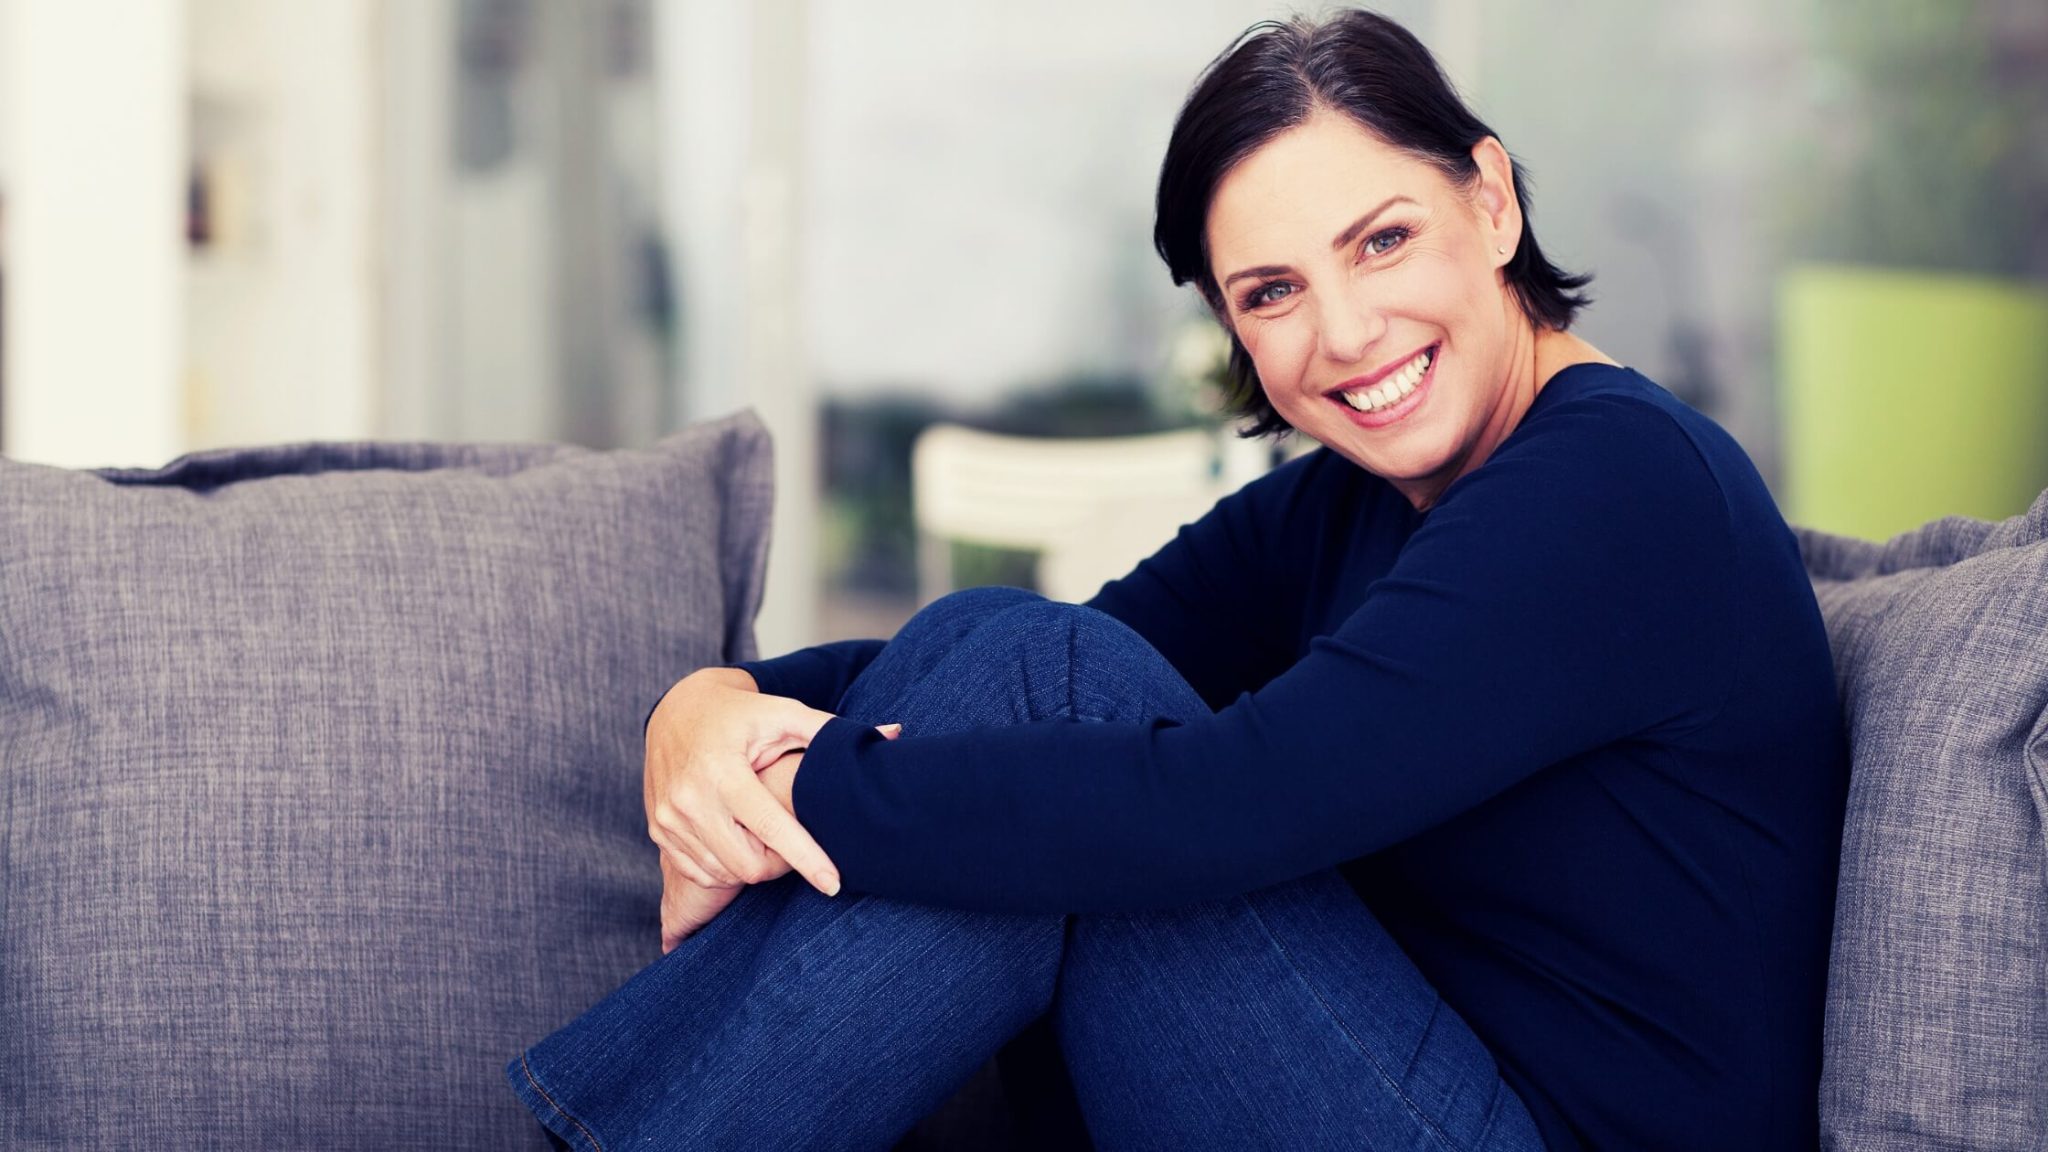 Female business coach smiling seated on a sofa